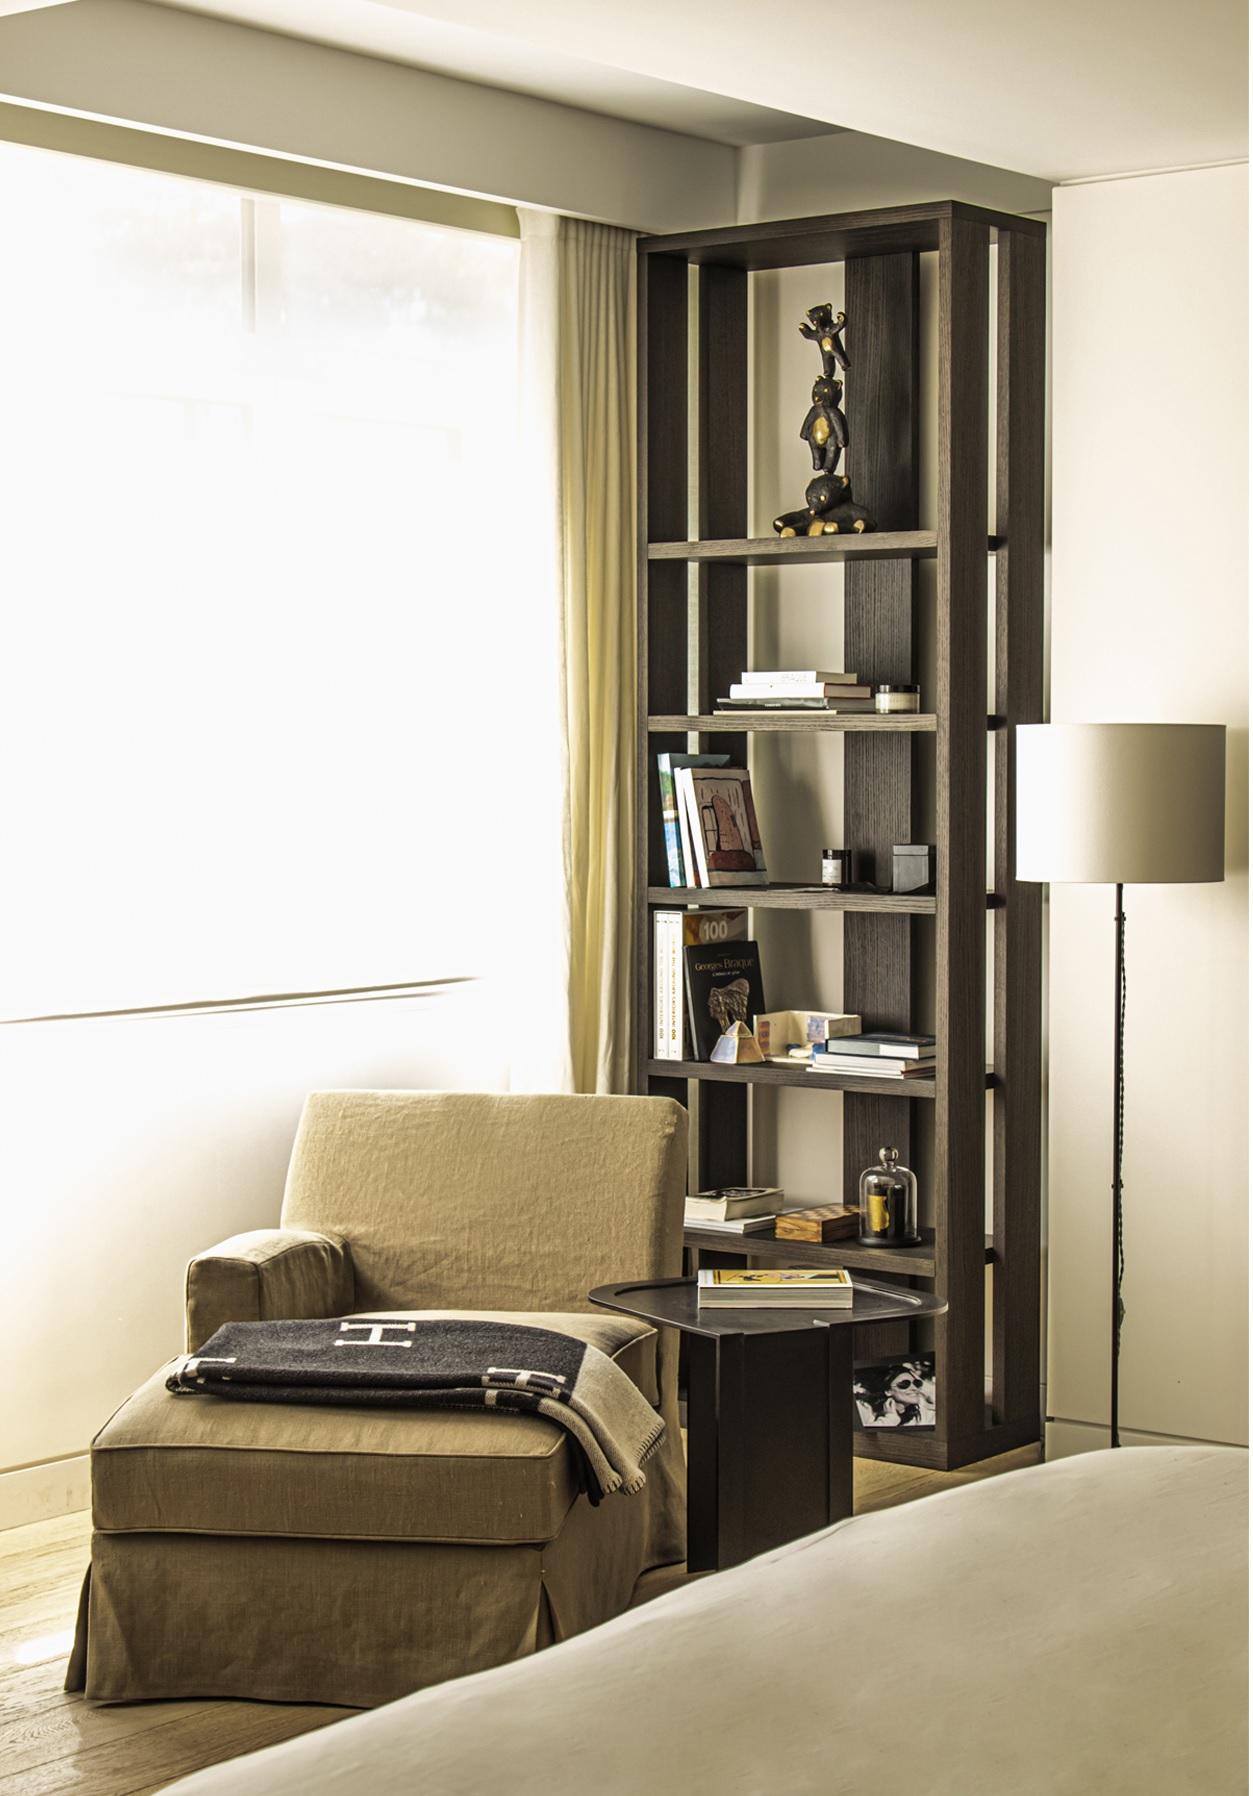 Alto Bookcase by LK Edition
Dimensions: 36 x 80 x H 280 cm
Materials: Black Stained Oak and one led. 

It is with the sense of detail and requirement, this research of the exception by the selection of noble materials and his culture of the